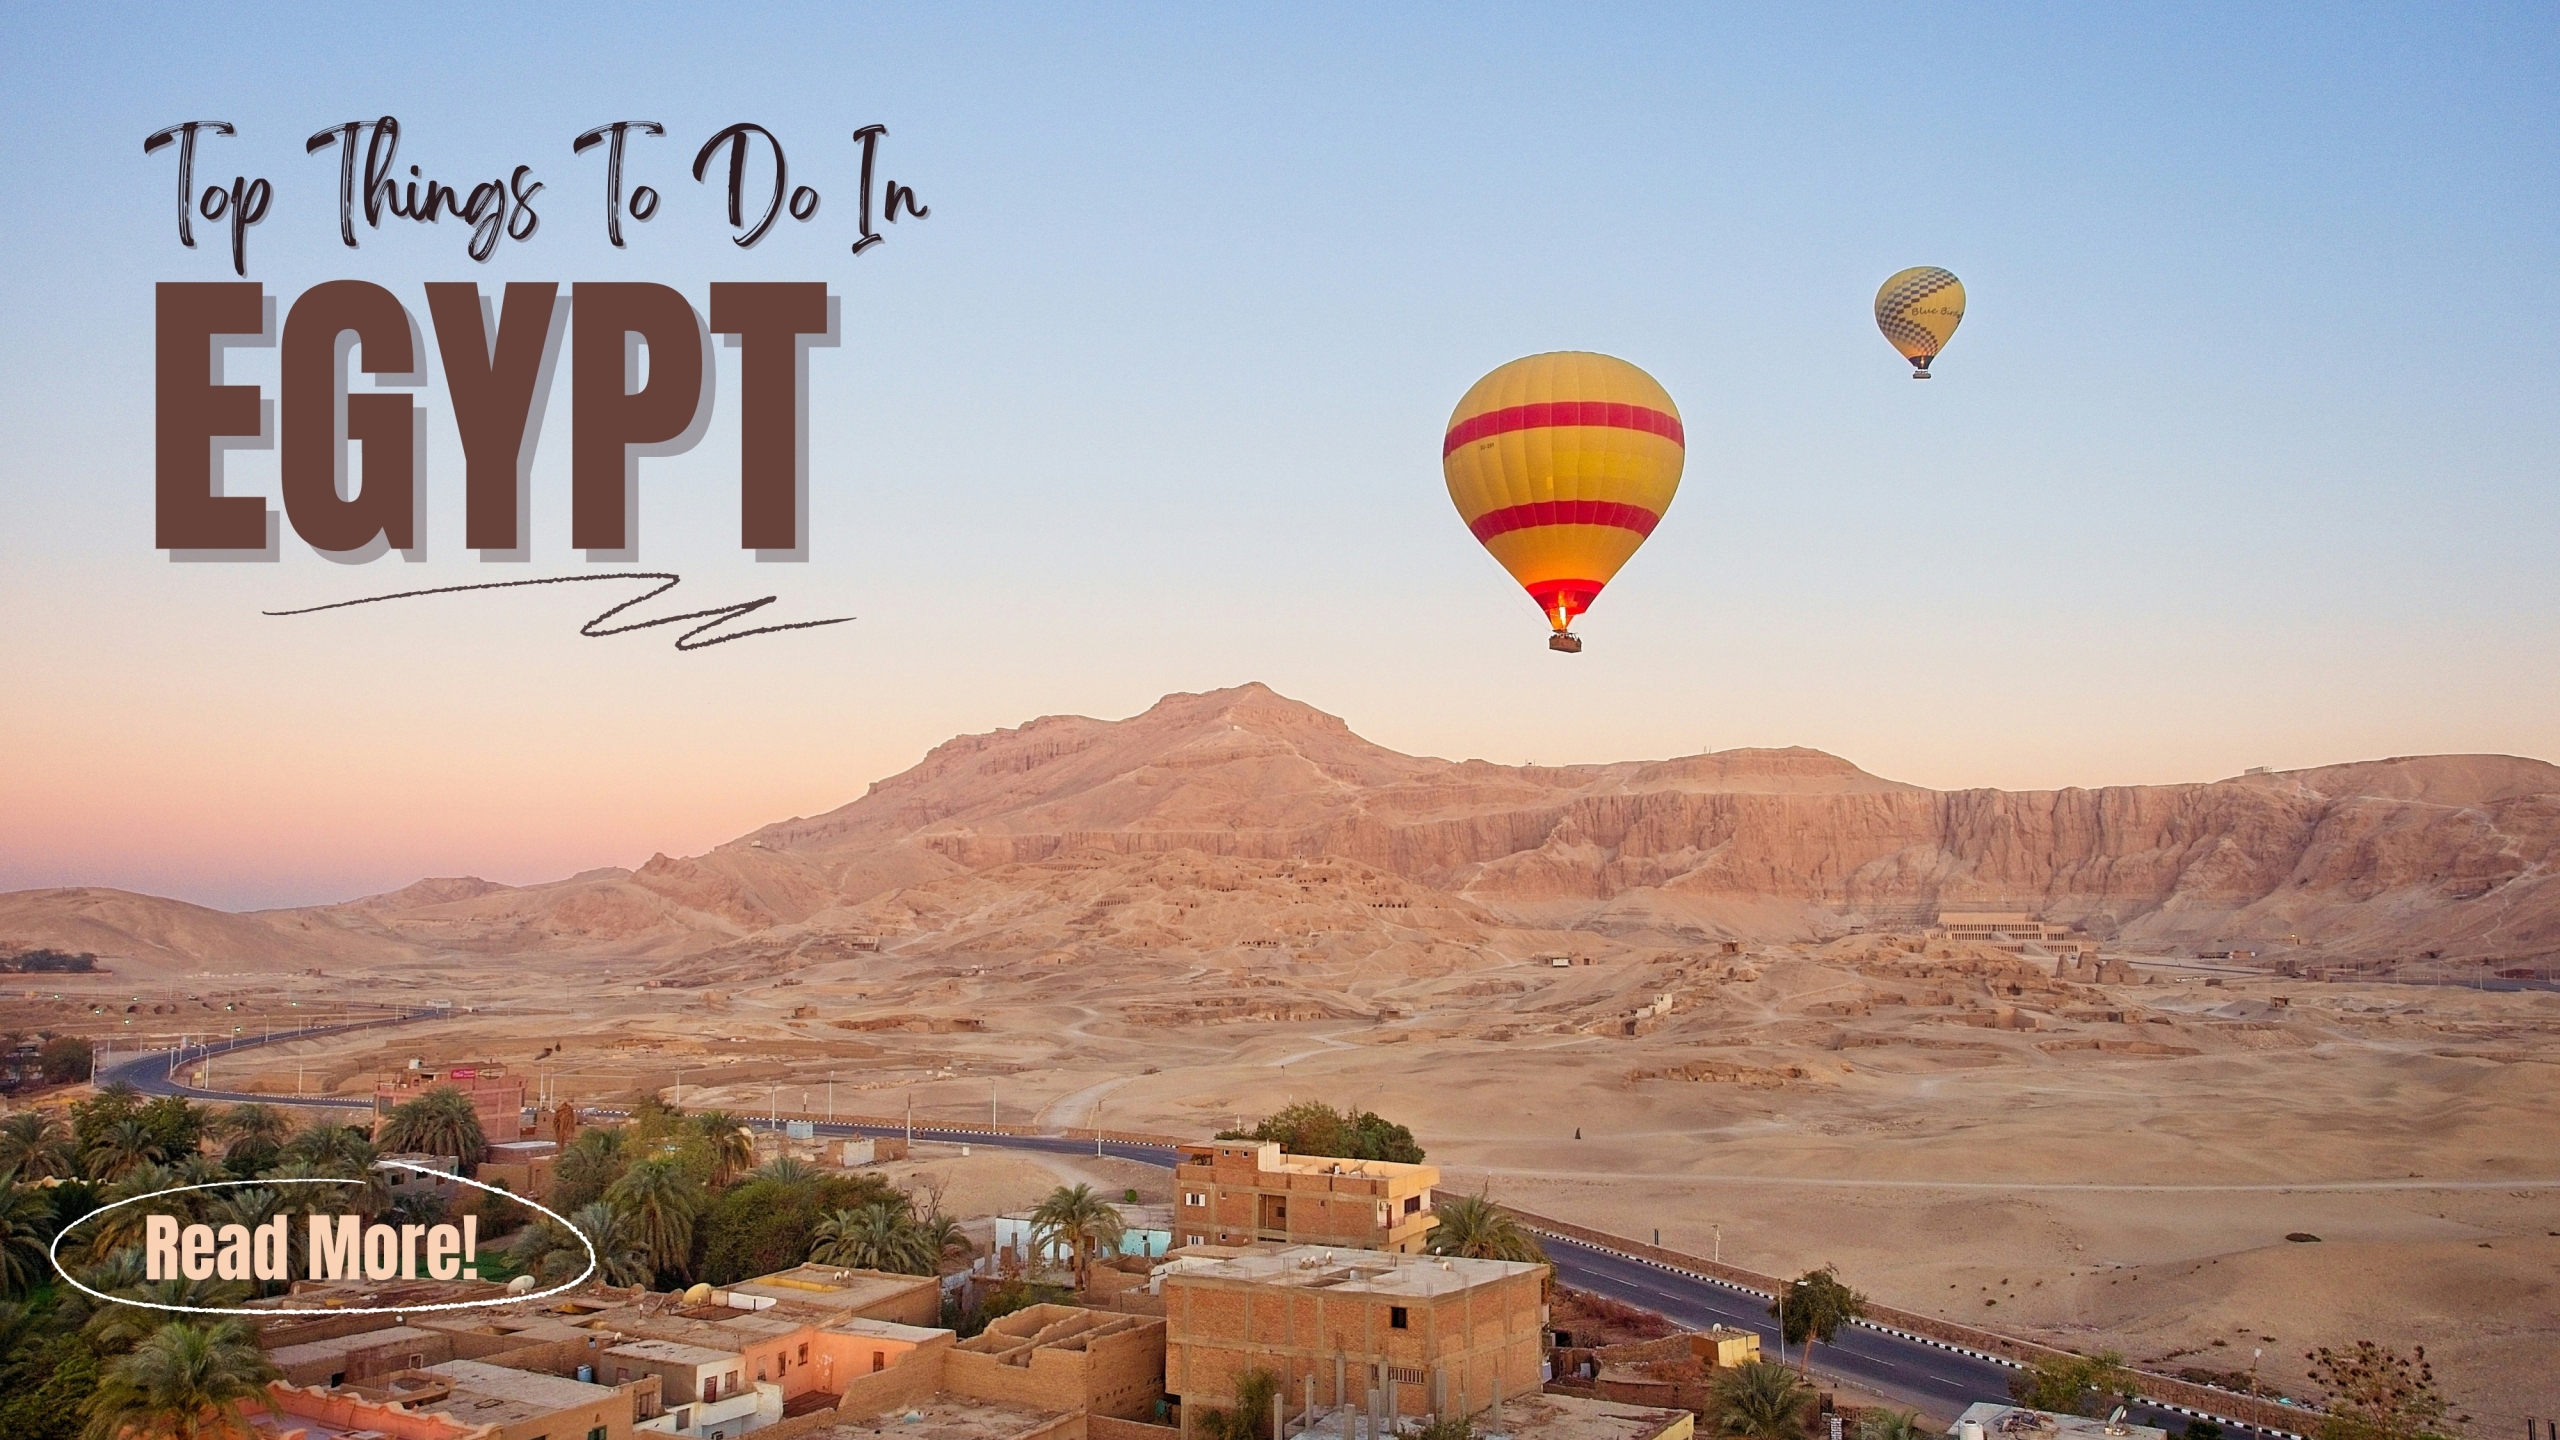 Things to do in egypt